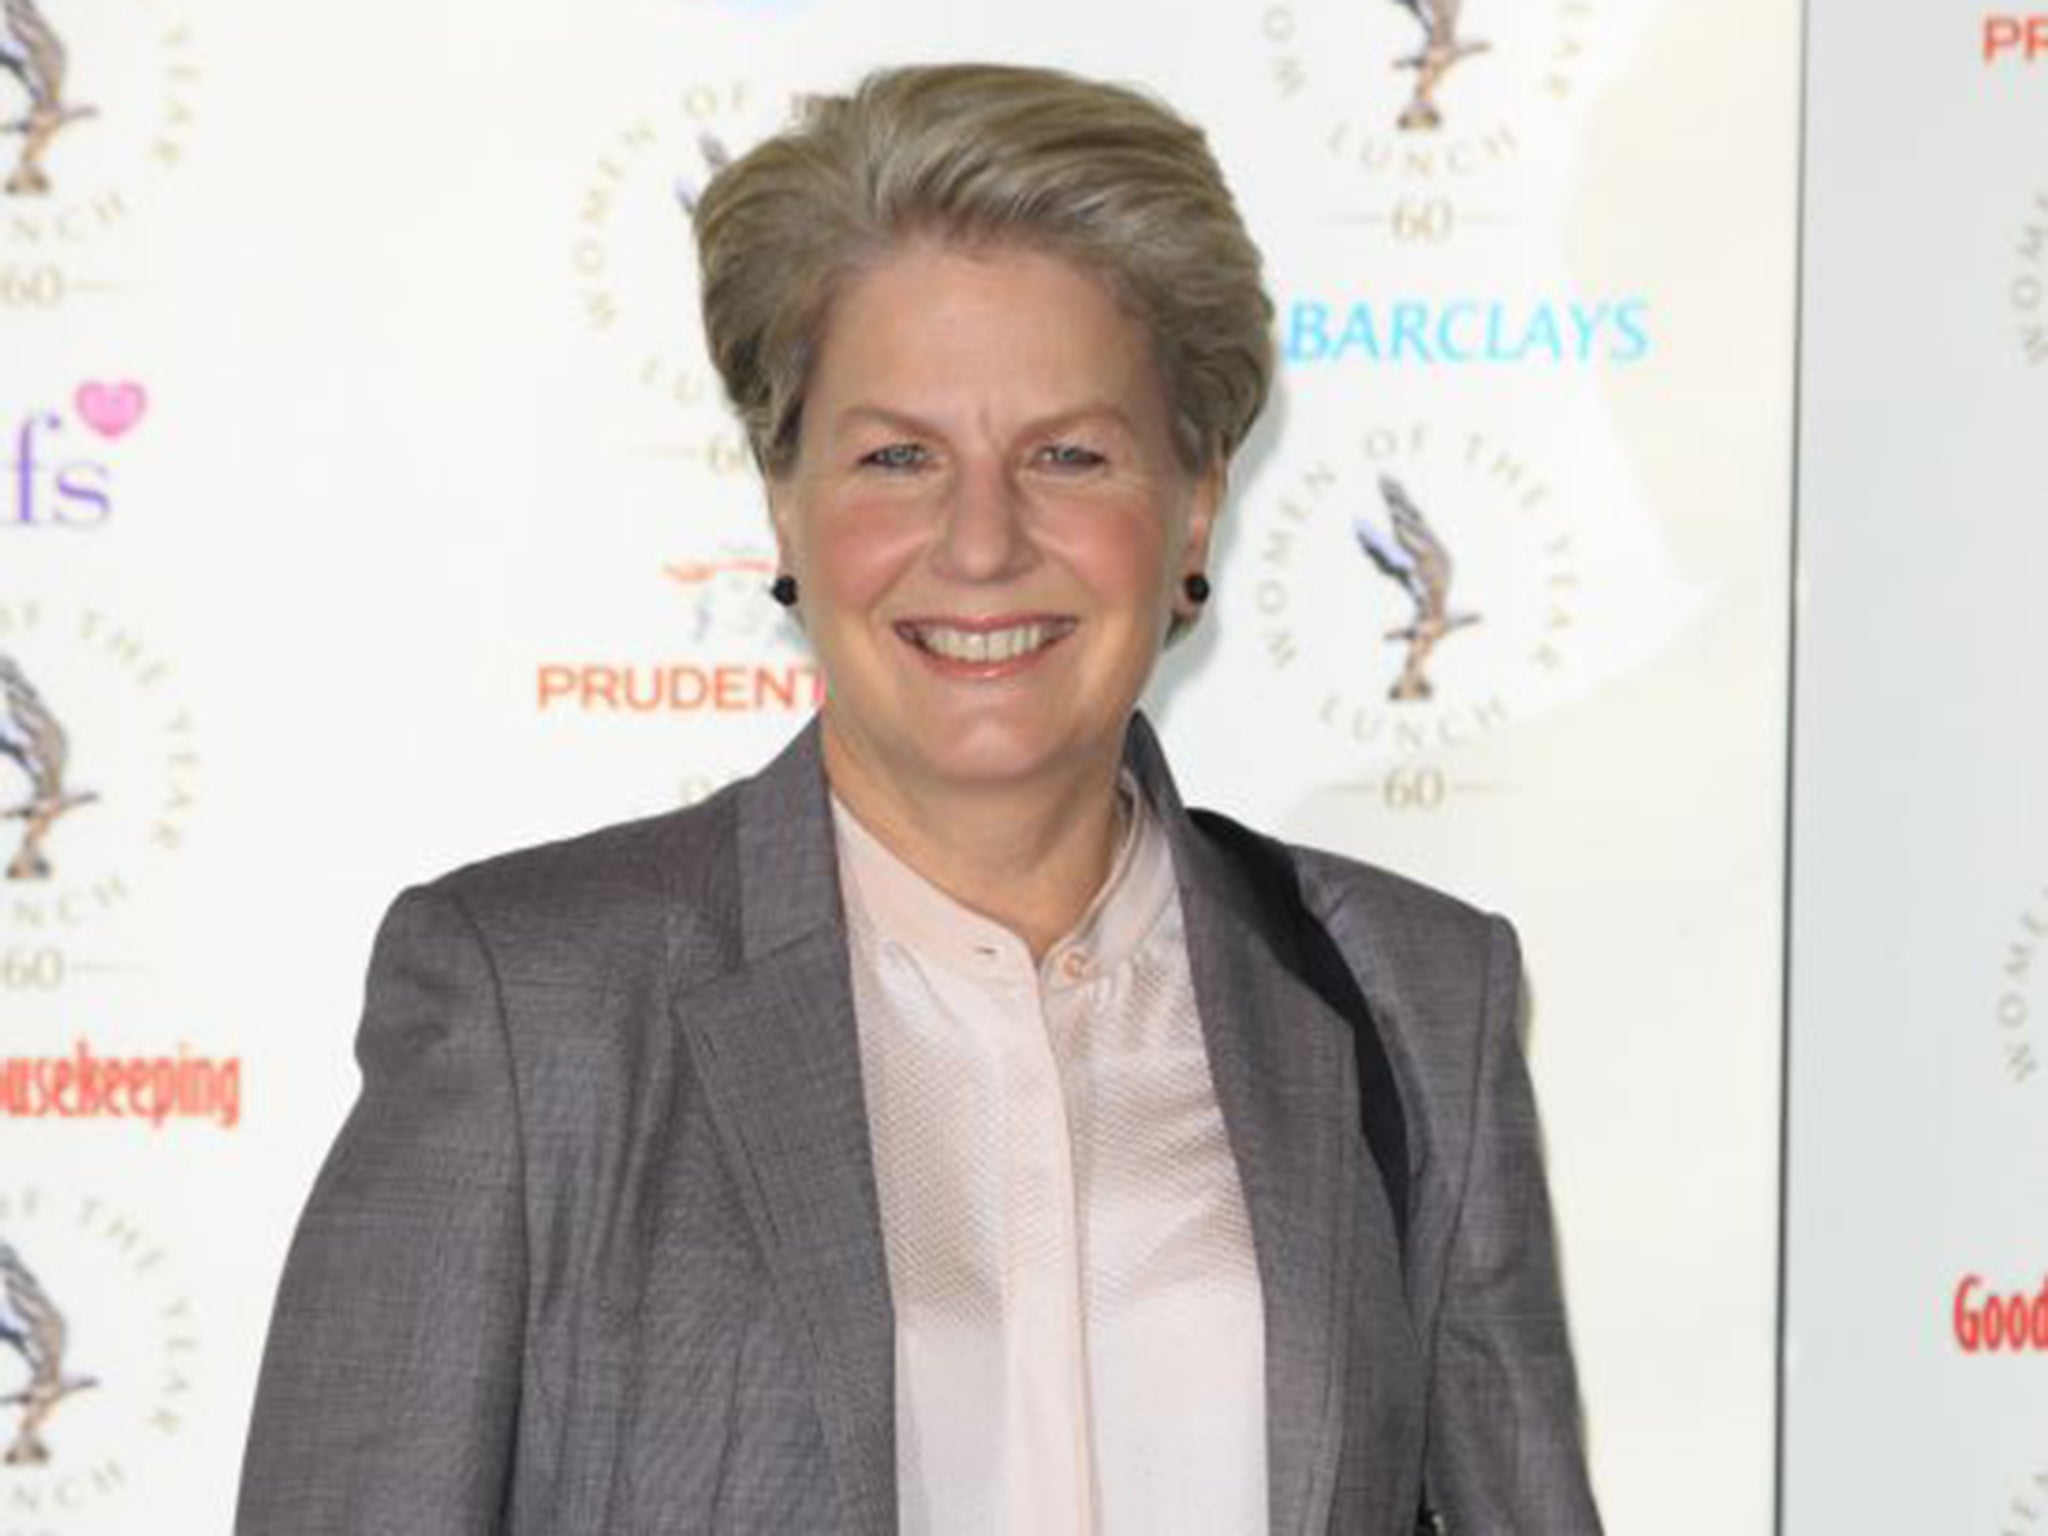 Sandi Toksvig could stand as WEP’s London mayoral candidate in next year’s election (Ge